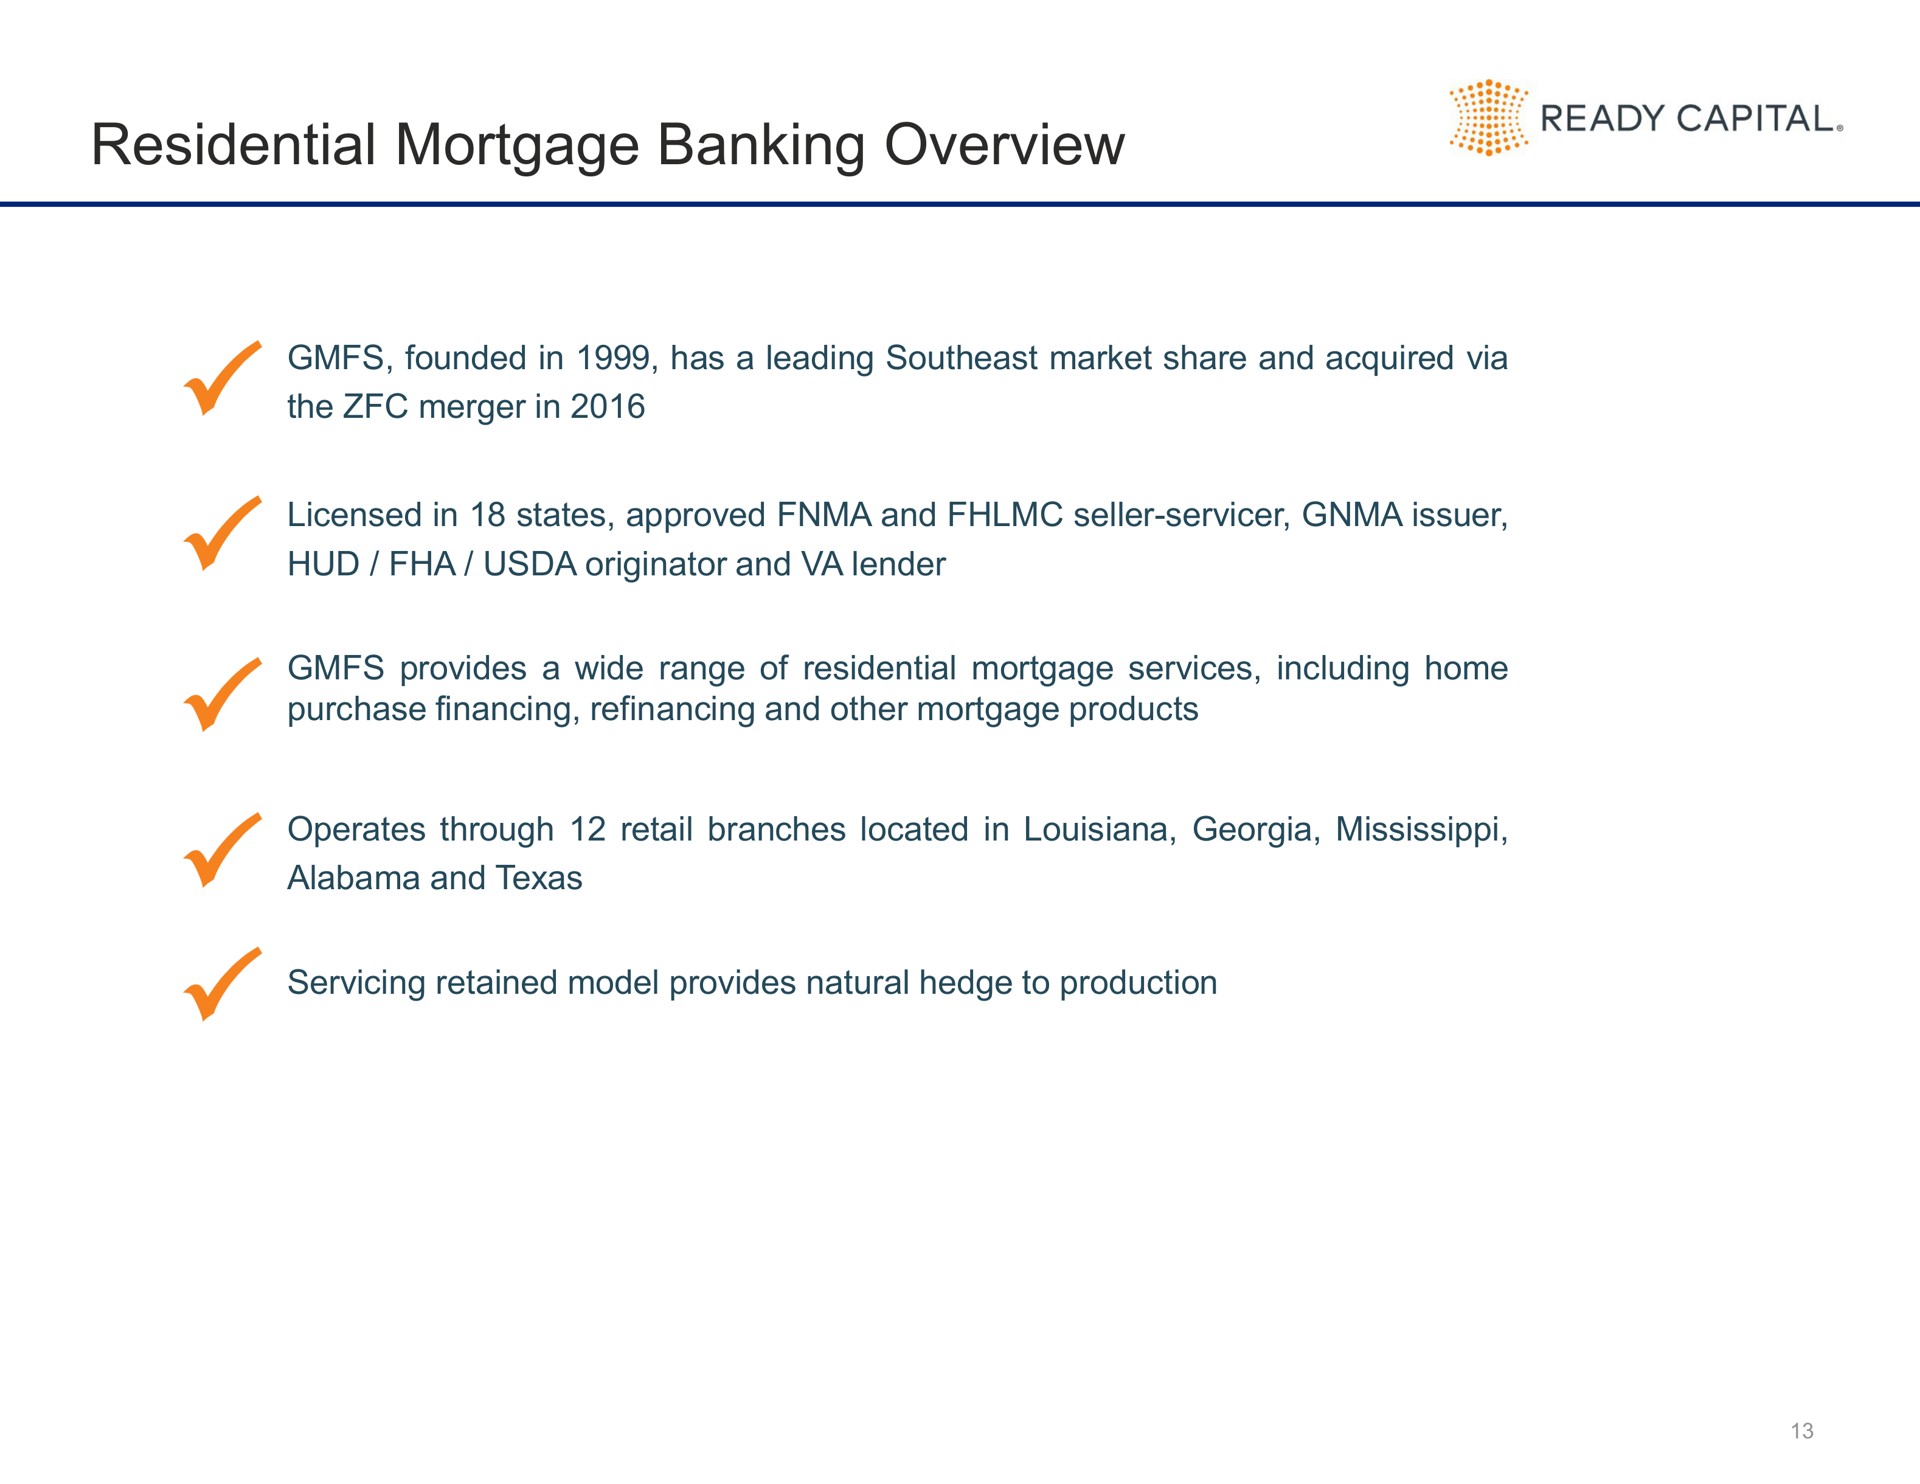 residential mortgage banking overview ready capital a | Ready Capital